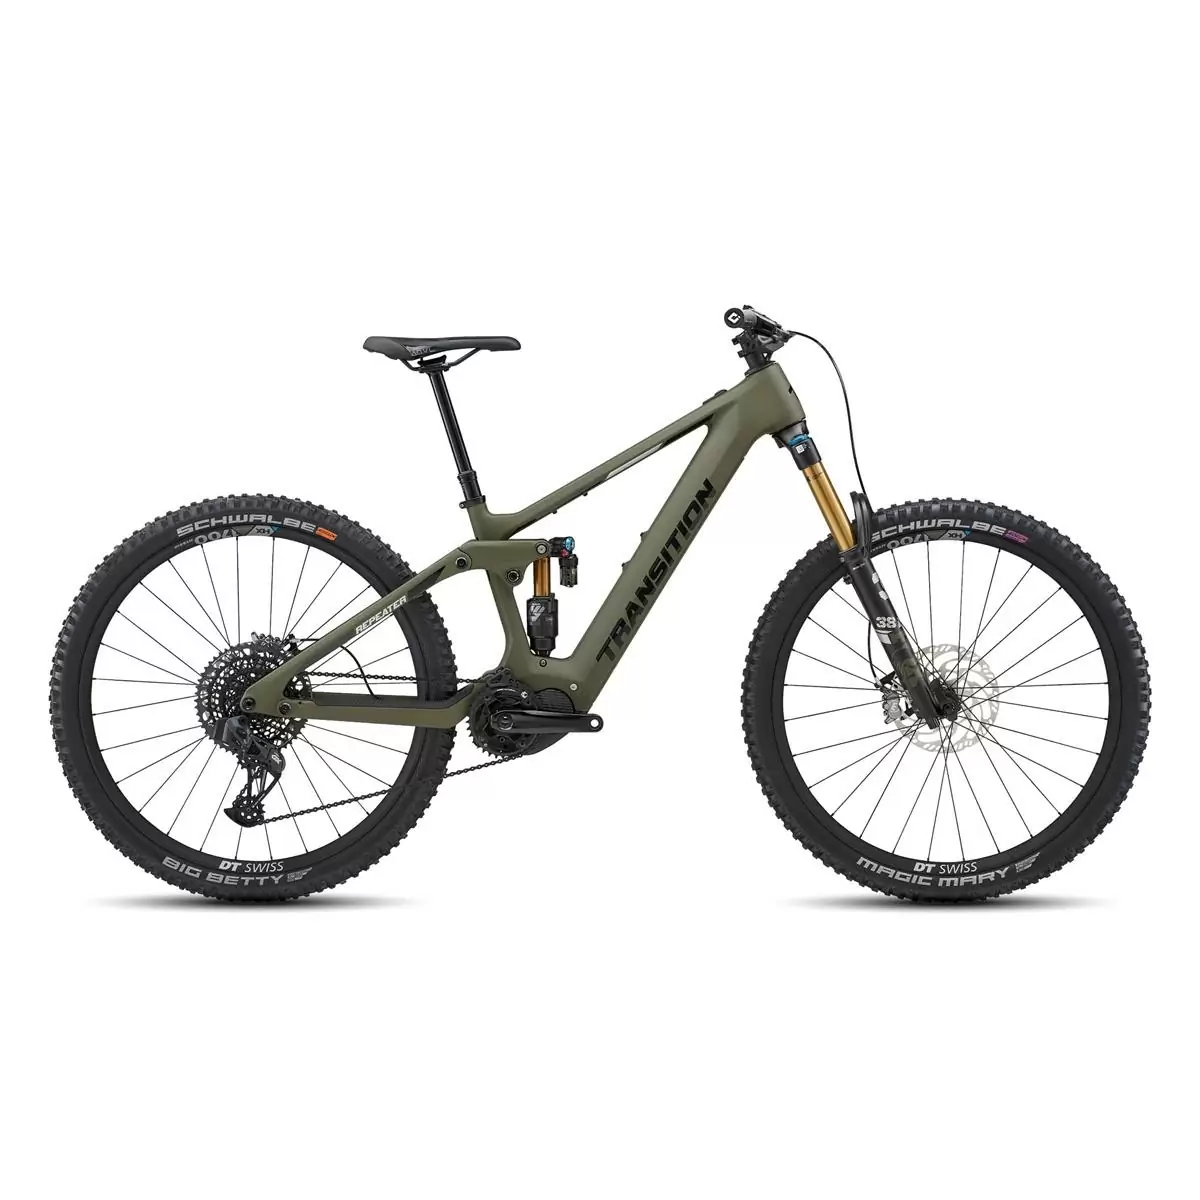 Repeater Carbon AXS 29'' 160mm 12s 630Wh Shimano EP8 Mossy Green Größe XL - image